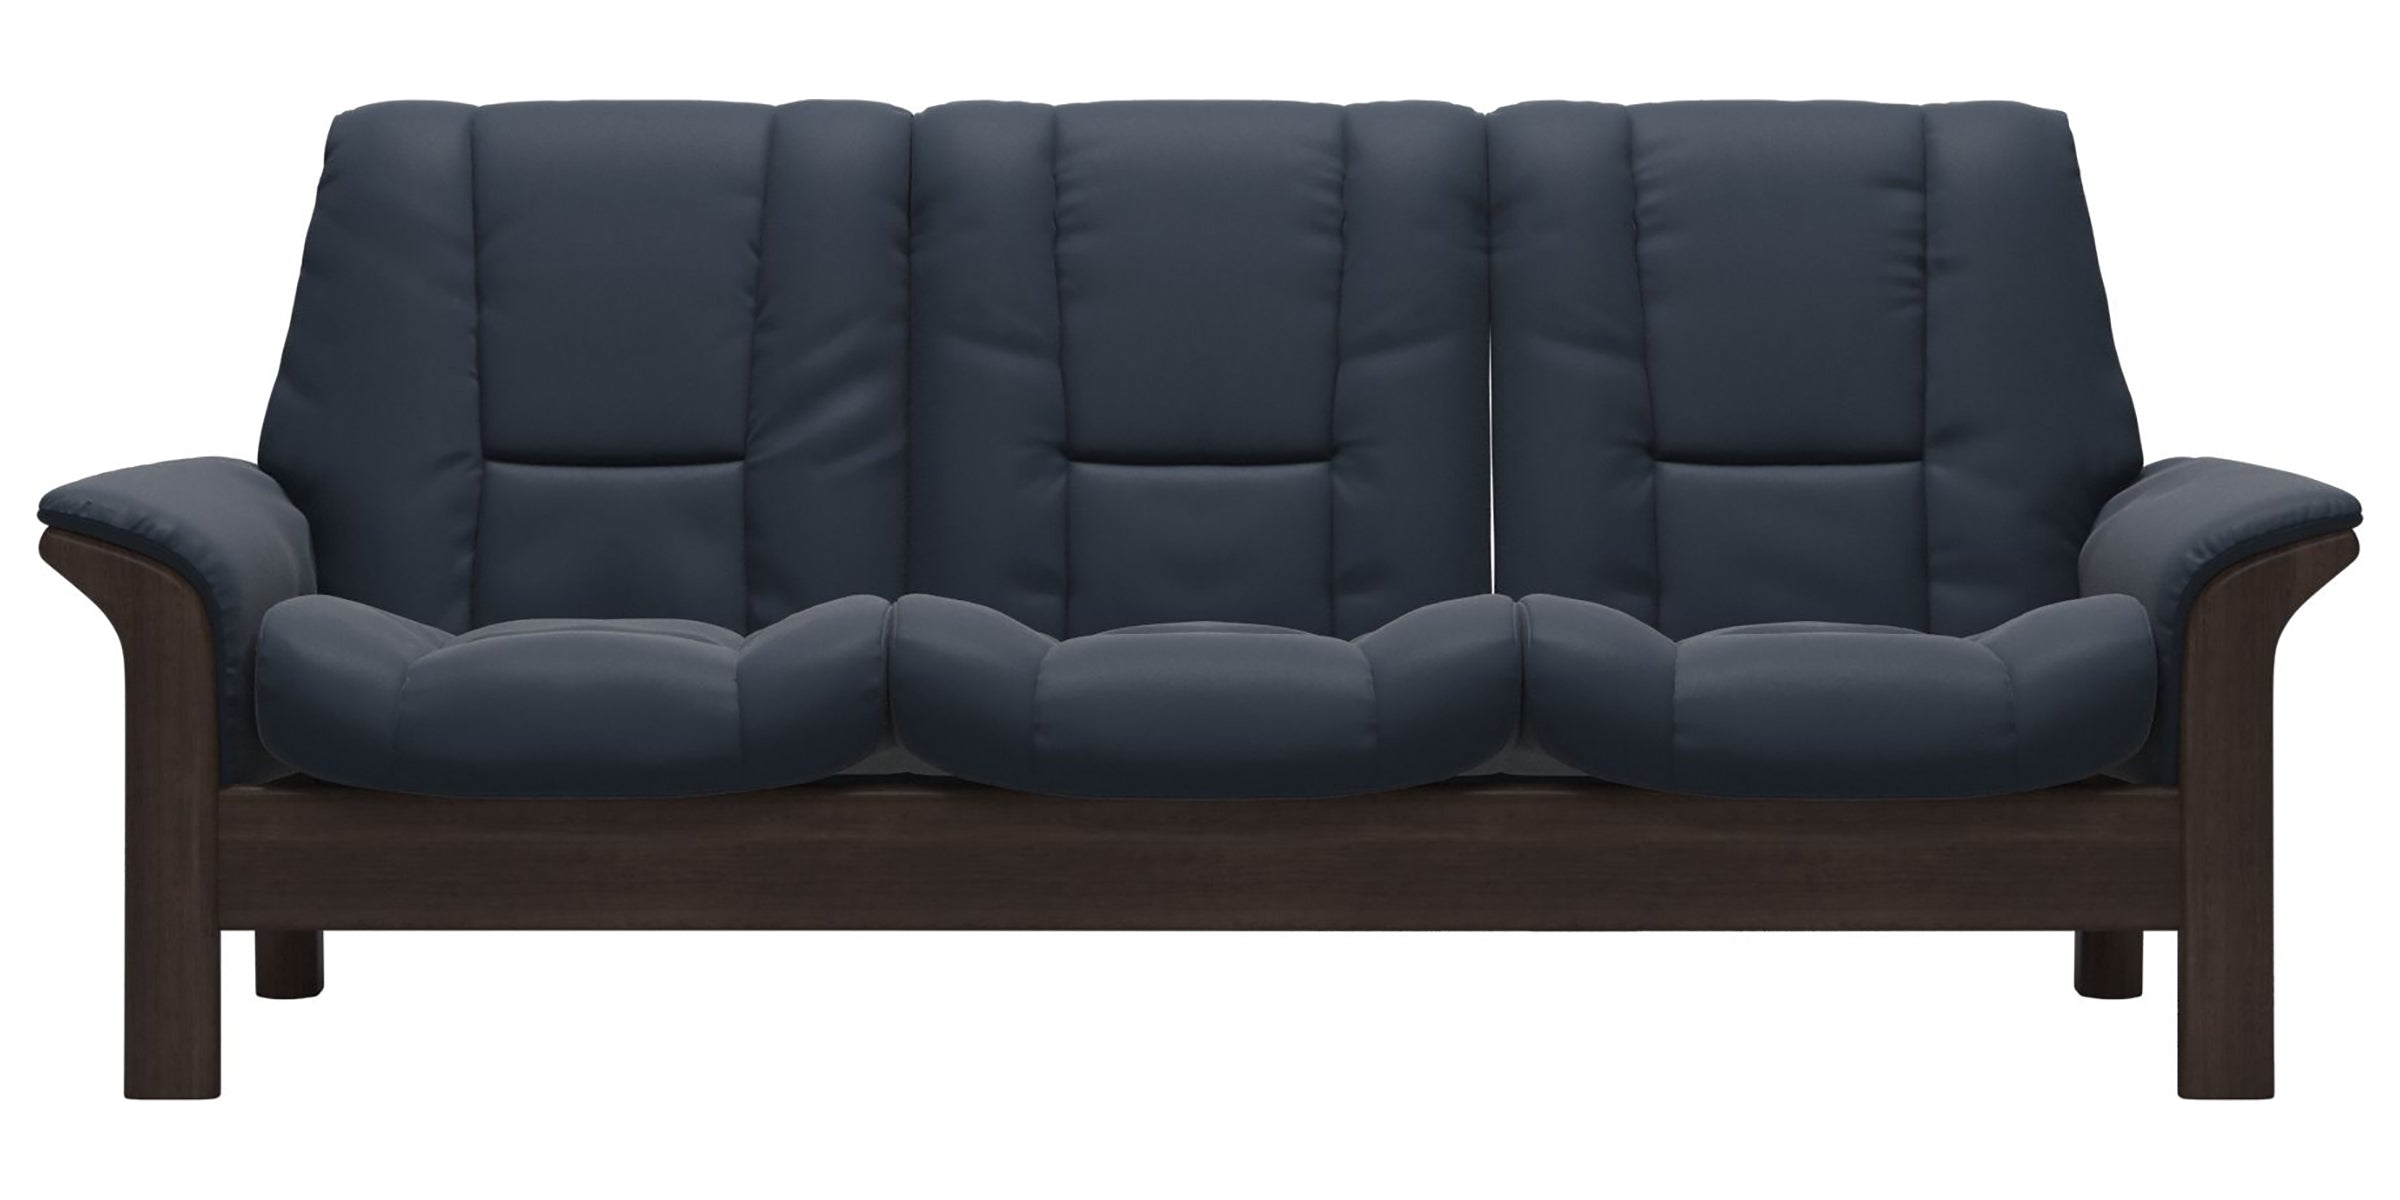 Paloma Leather Oxford Blue and Wenge Base | Stressless Windsor 3-Seater Low Back Sofa | Valley Ridge Furniture